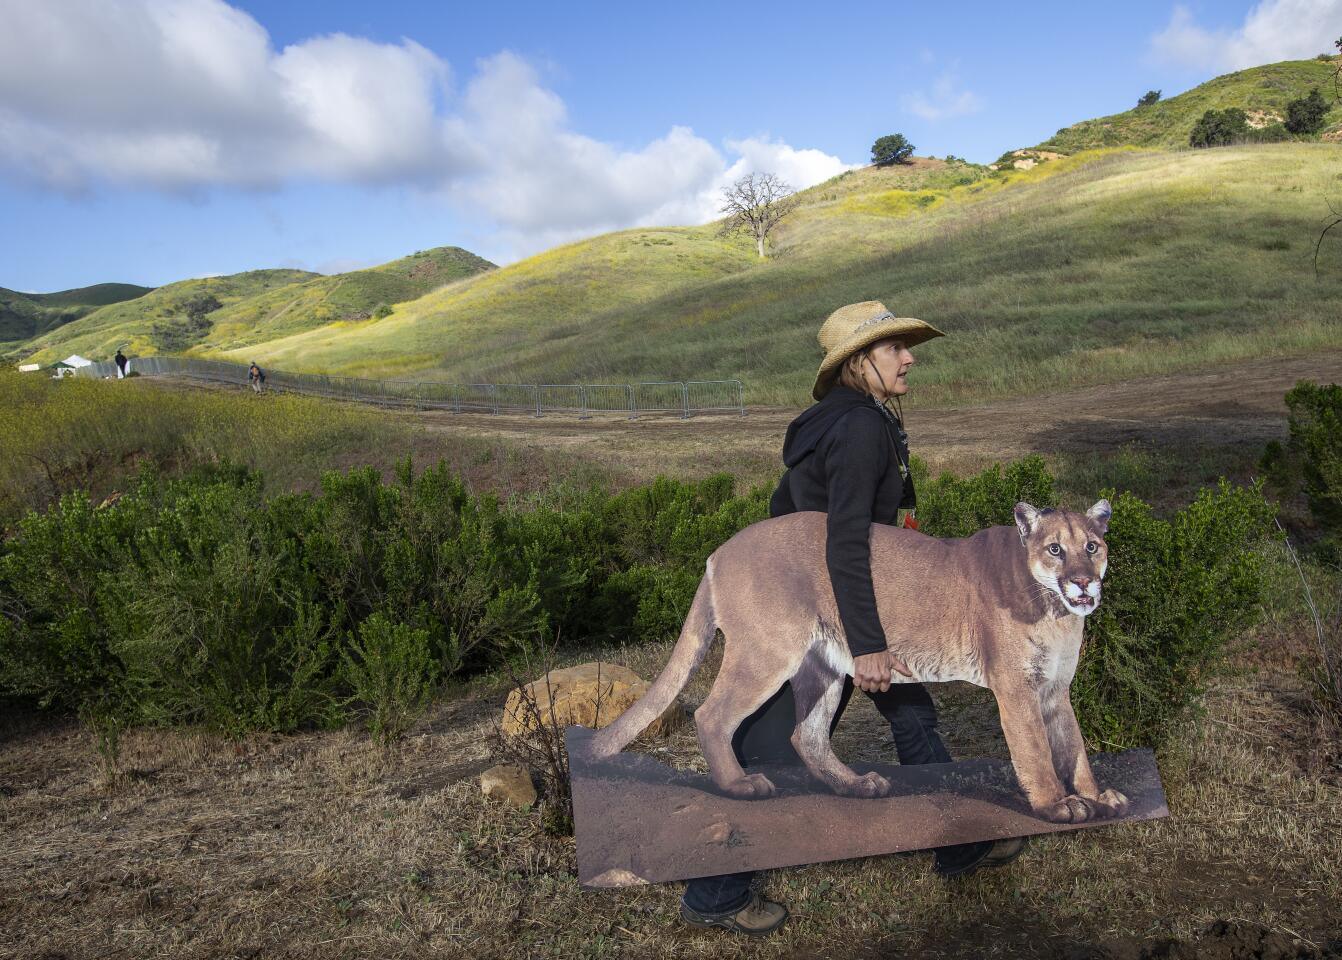 A woman walks outdoors with a cardboard cutout of P-22.